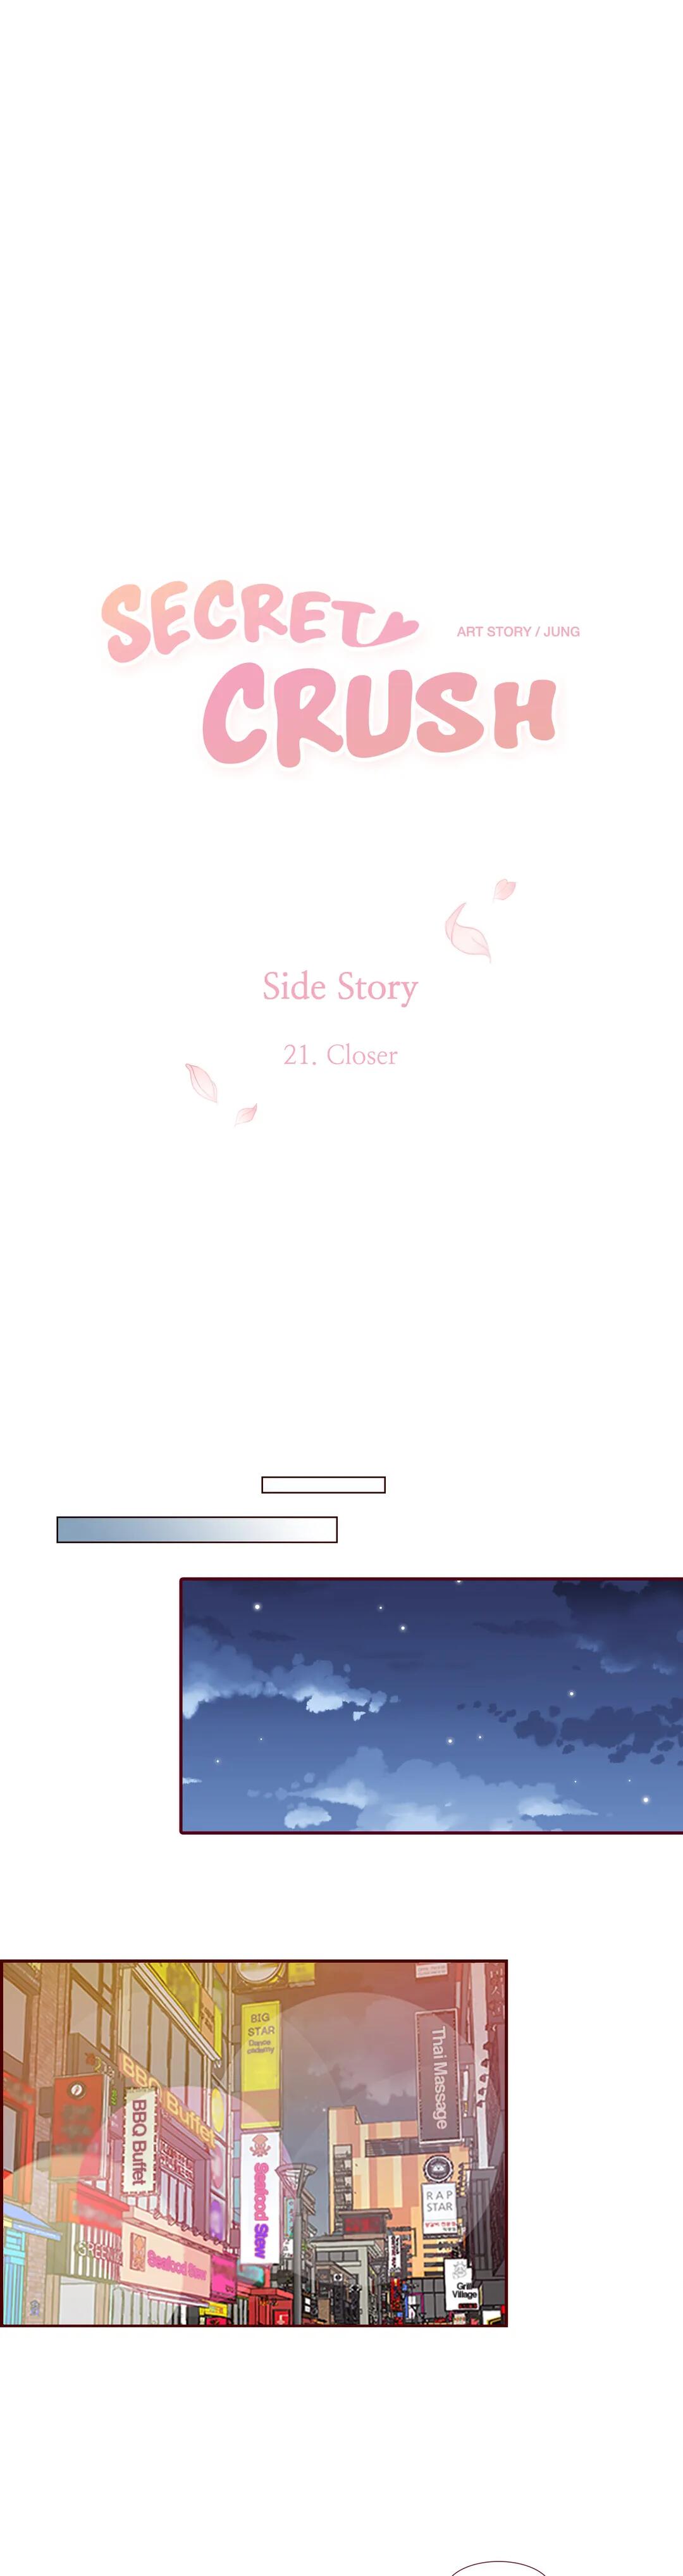 Secret Crush Chapter 114 - Side Story: Closer - Picture 1